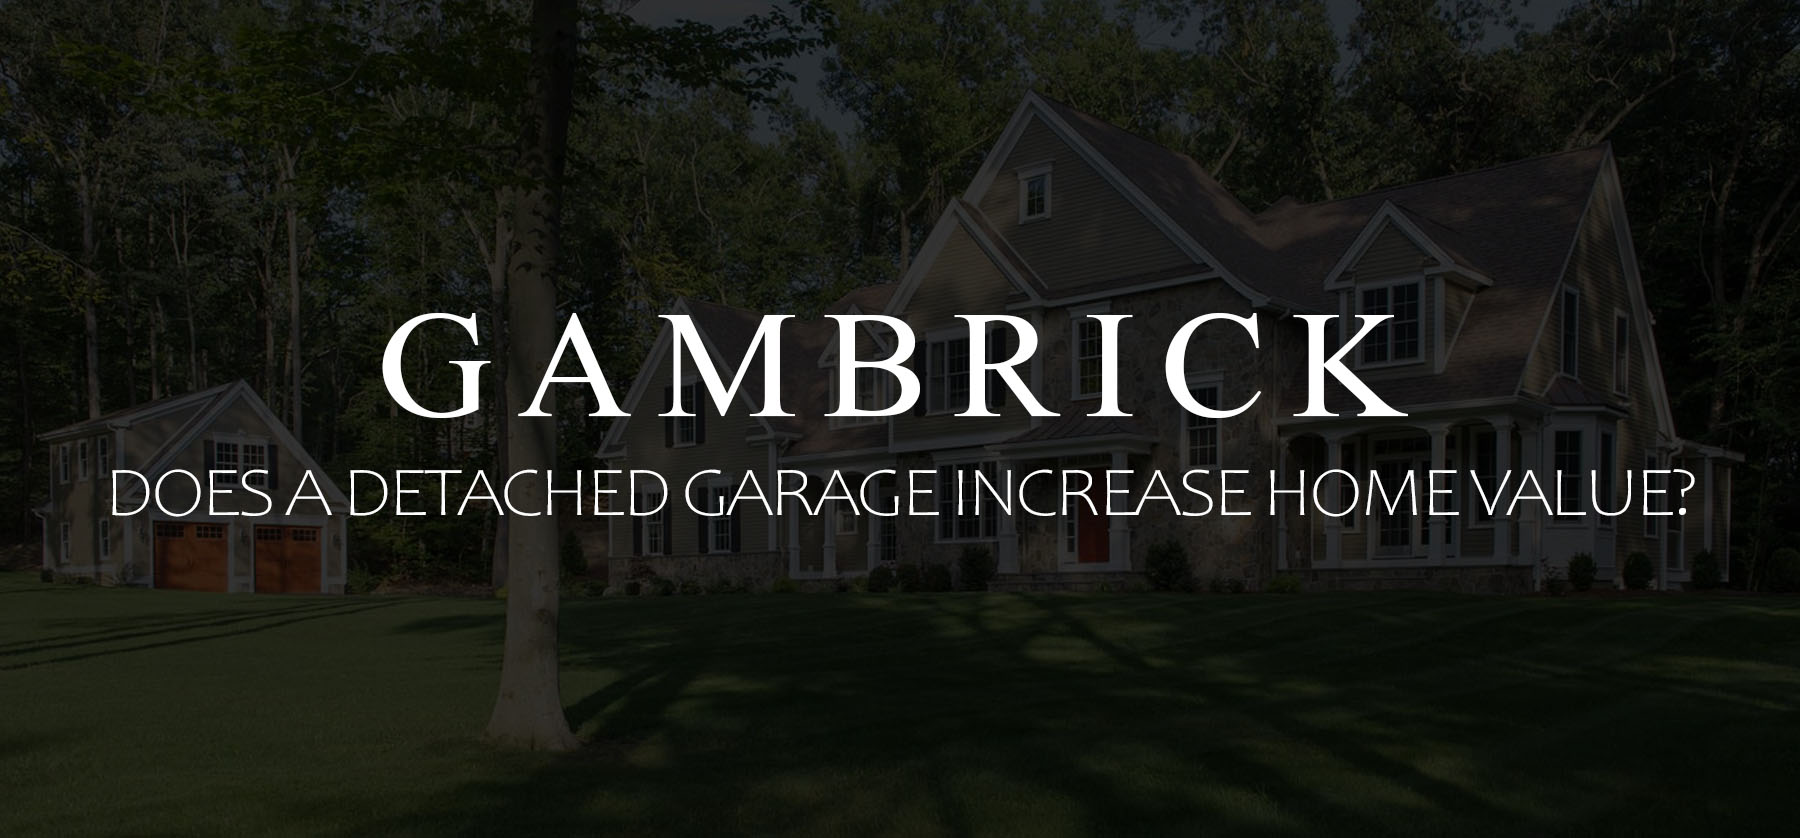 A Detached Garage Increase Home Value, Does Adding A Detached Garage Increase Home Value